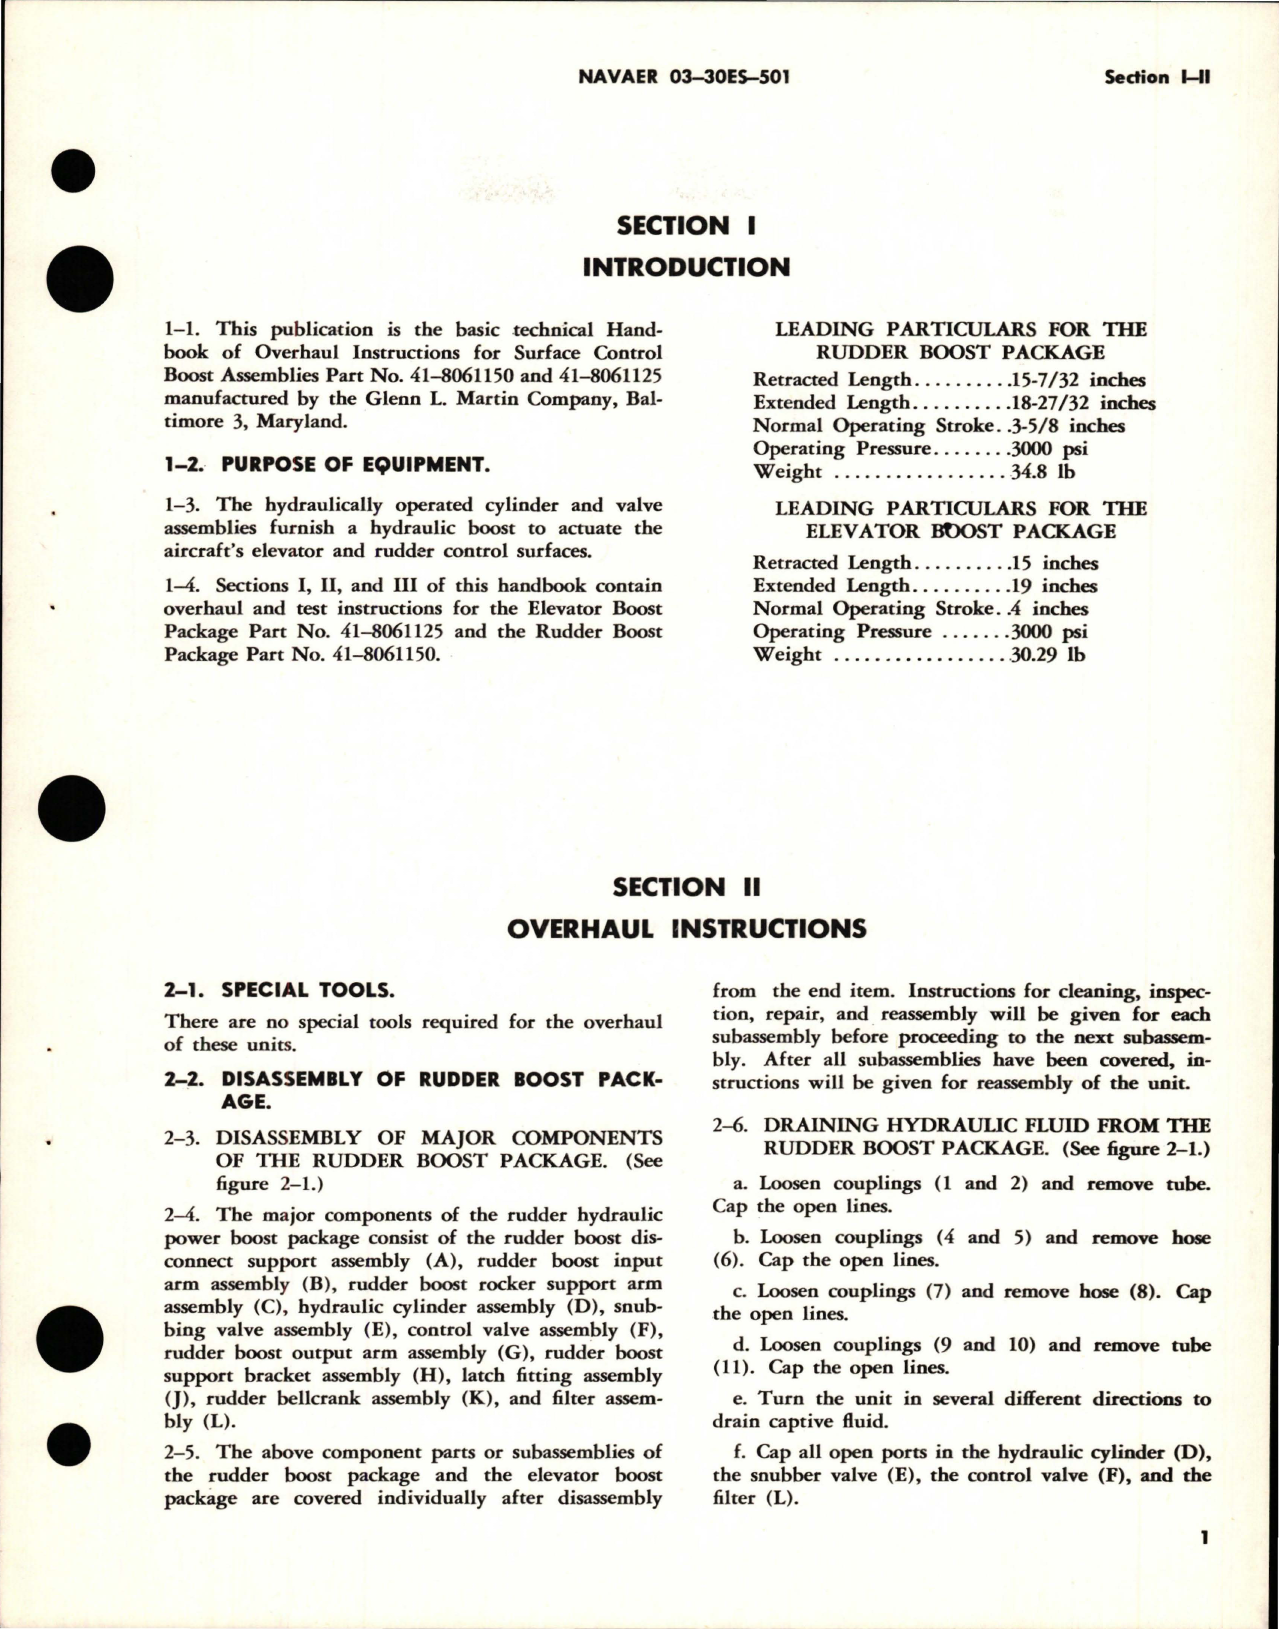 Sample page 7 from AirCorps Library document: Overhaul Instructions for Surface Control Boost Assembly - Parts 41-8061125 and 41-8061150